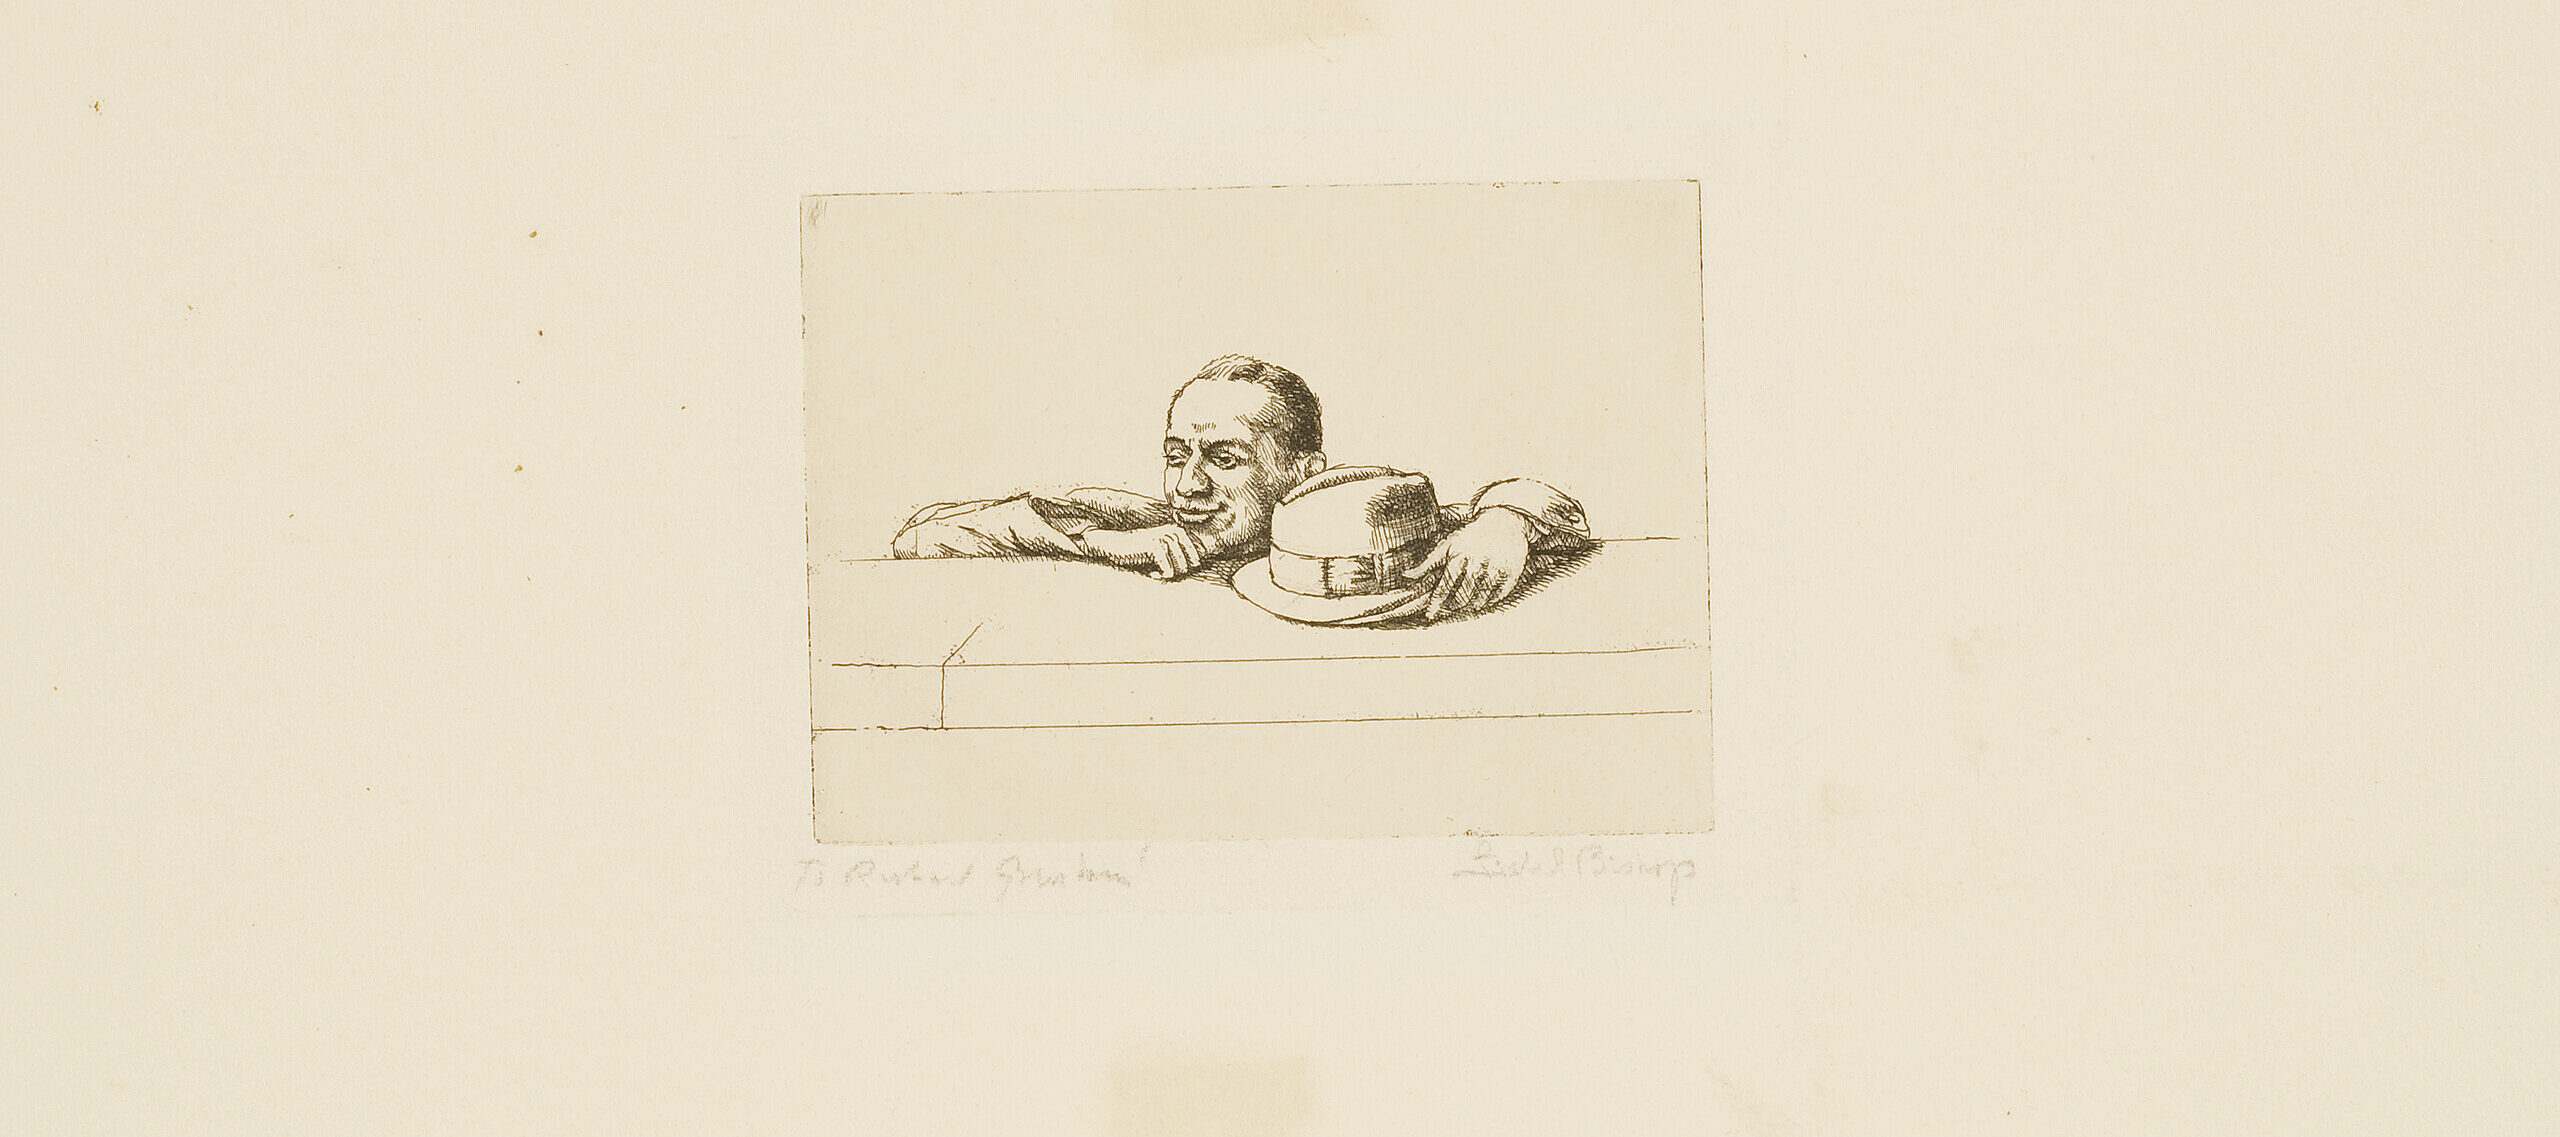 Isabel Bishop, <em>Over the Wall</em>, 1927; Etching on paper, 8 x 10 1/2 in.; National Museum of Women in the Arts, Bequest of Catherine Gamble Curran; © The Estate of Isabel Bishop. Courtesy of DC Moore Gallery, New York